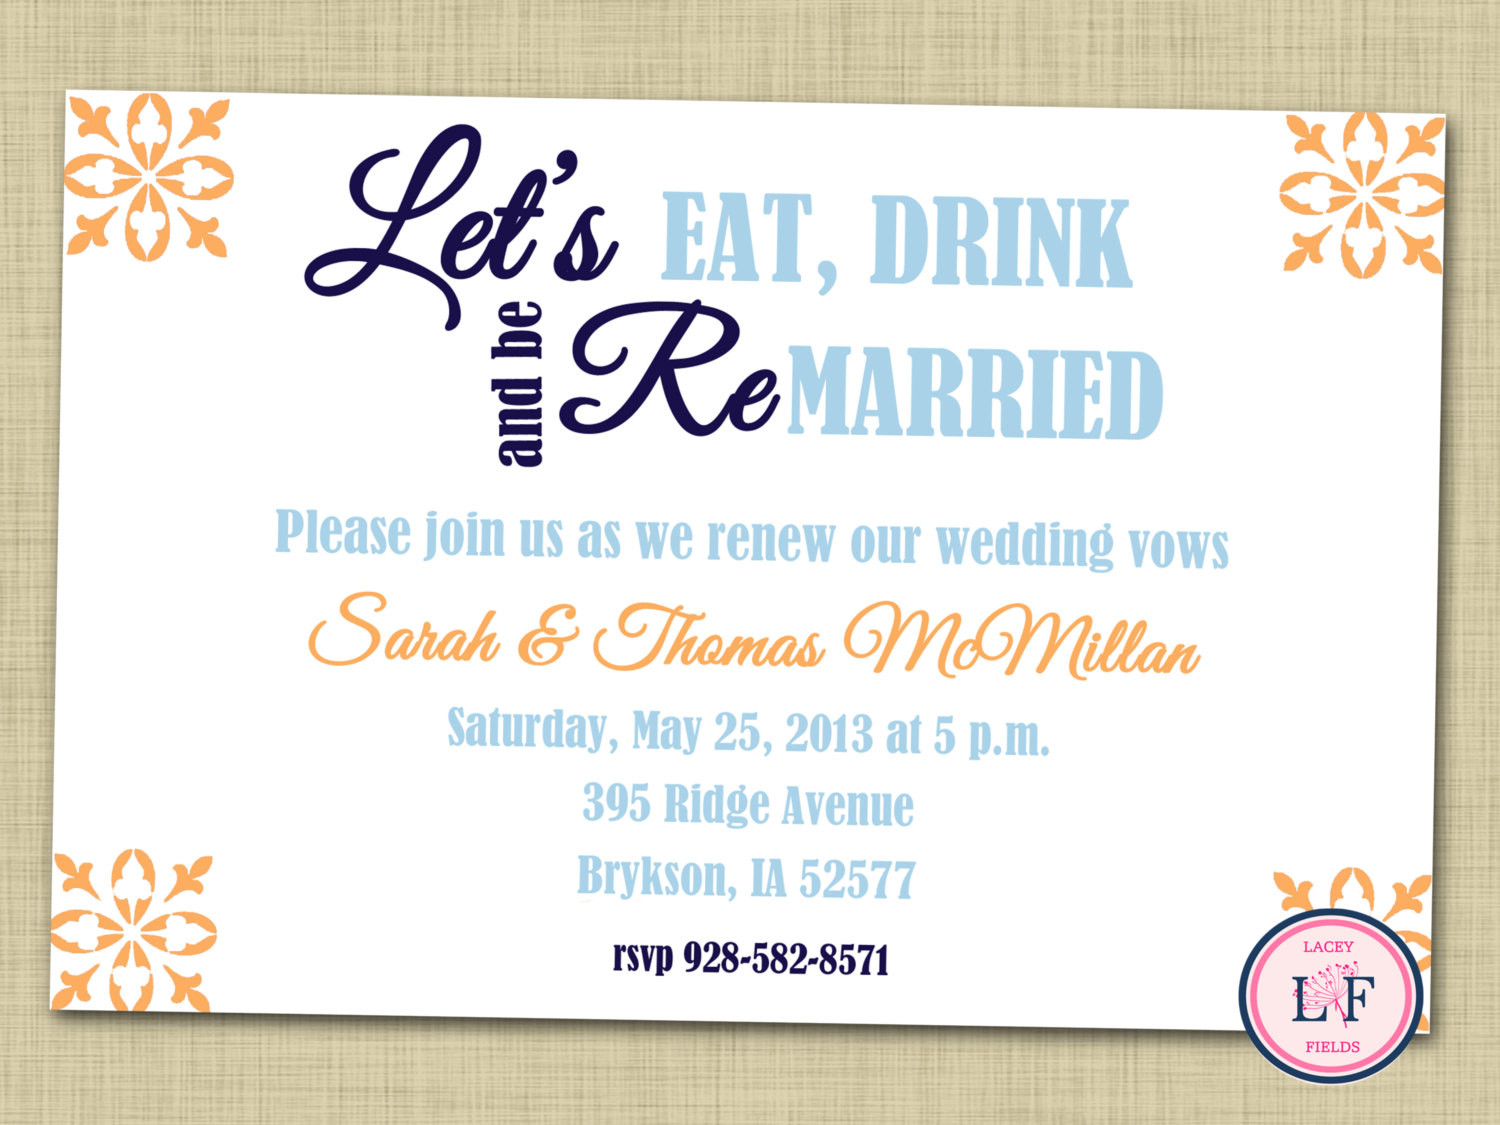 Sample Wedding Vow Renewal
 Vow renewal invitation printable Vow renewal party by